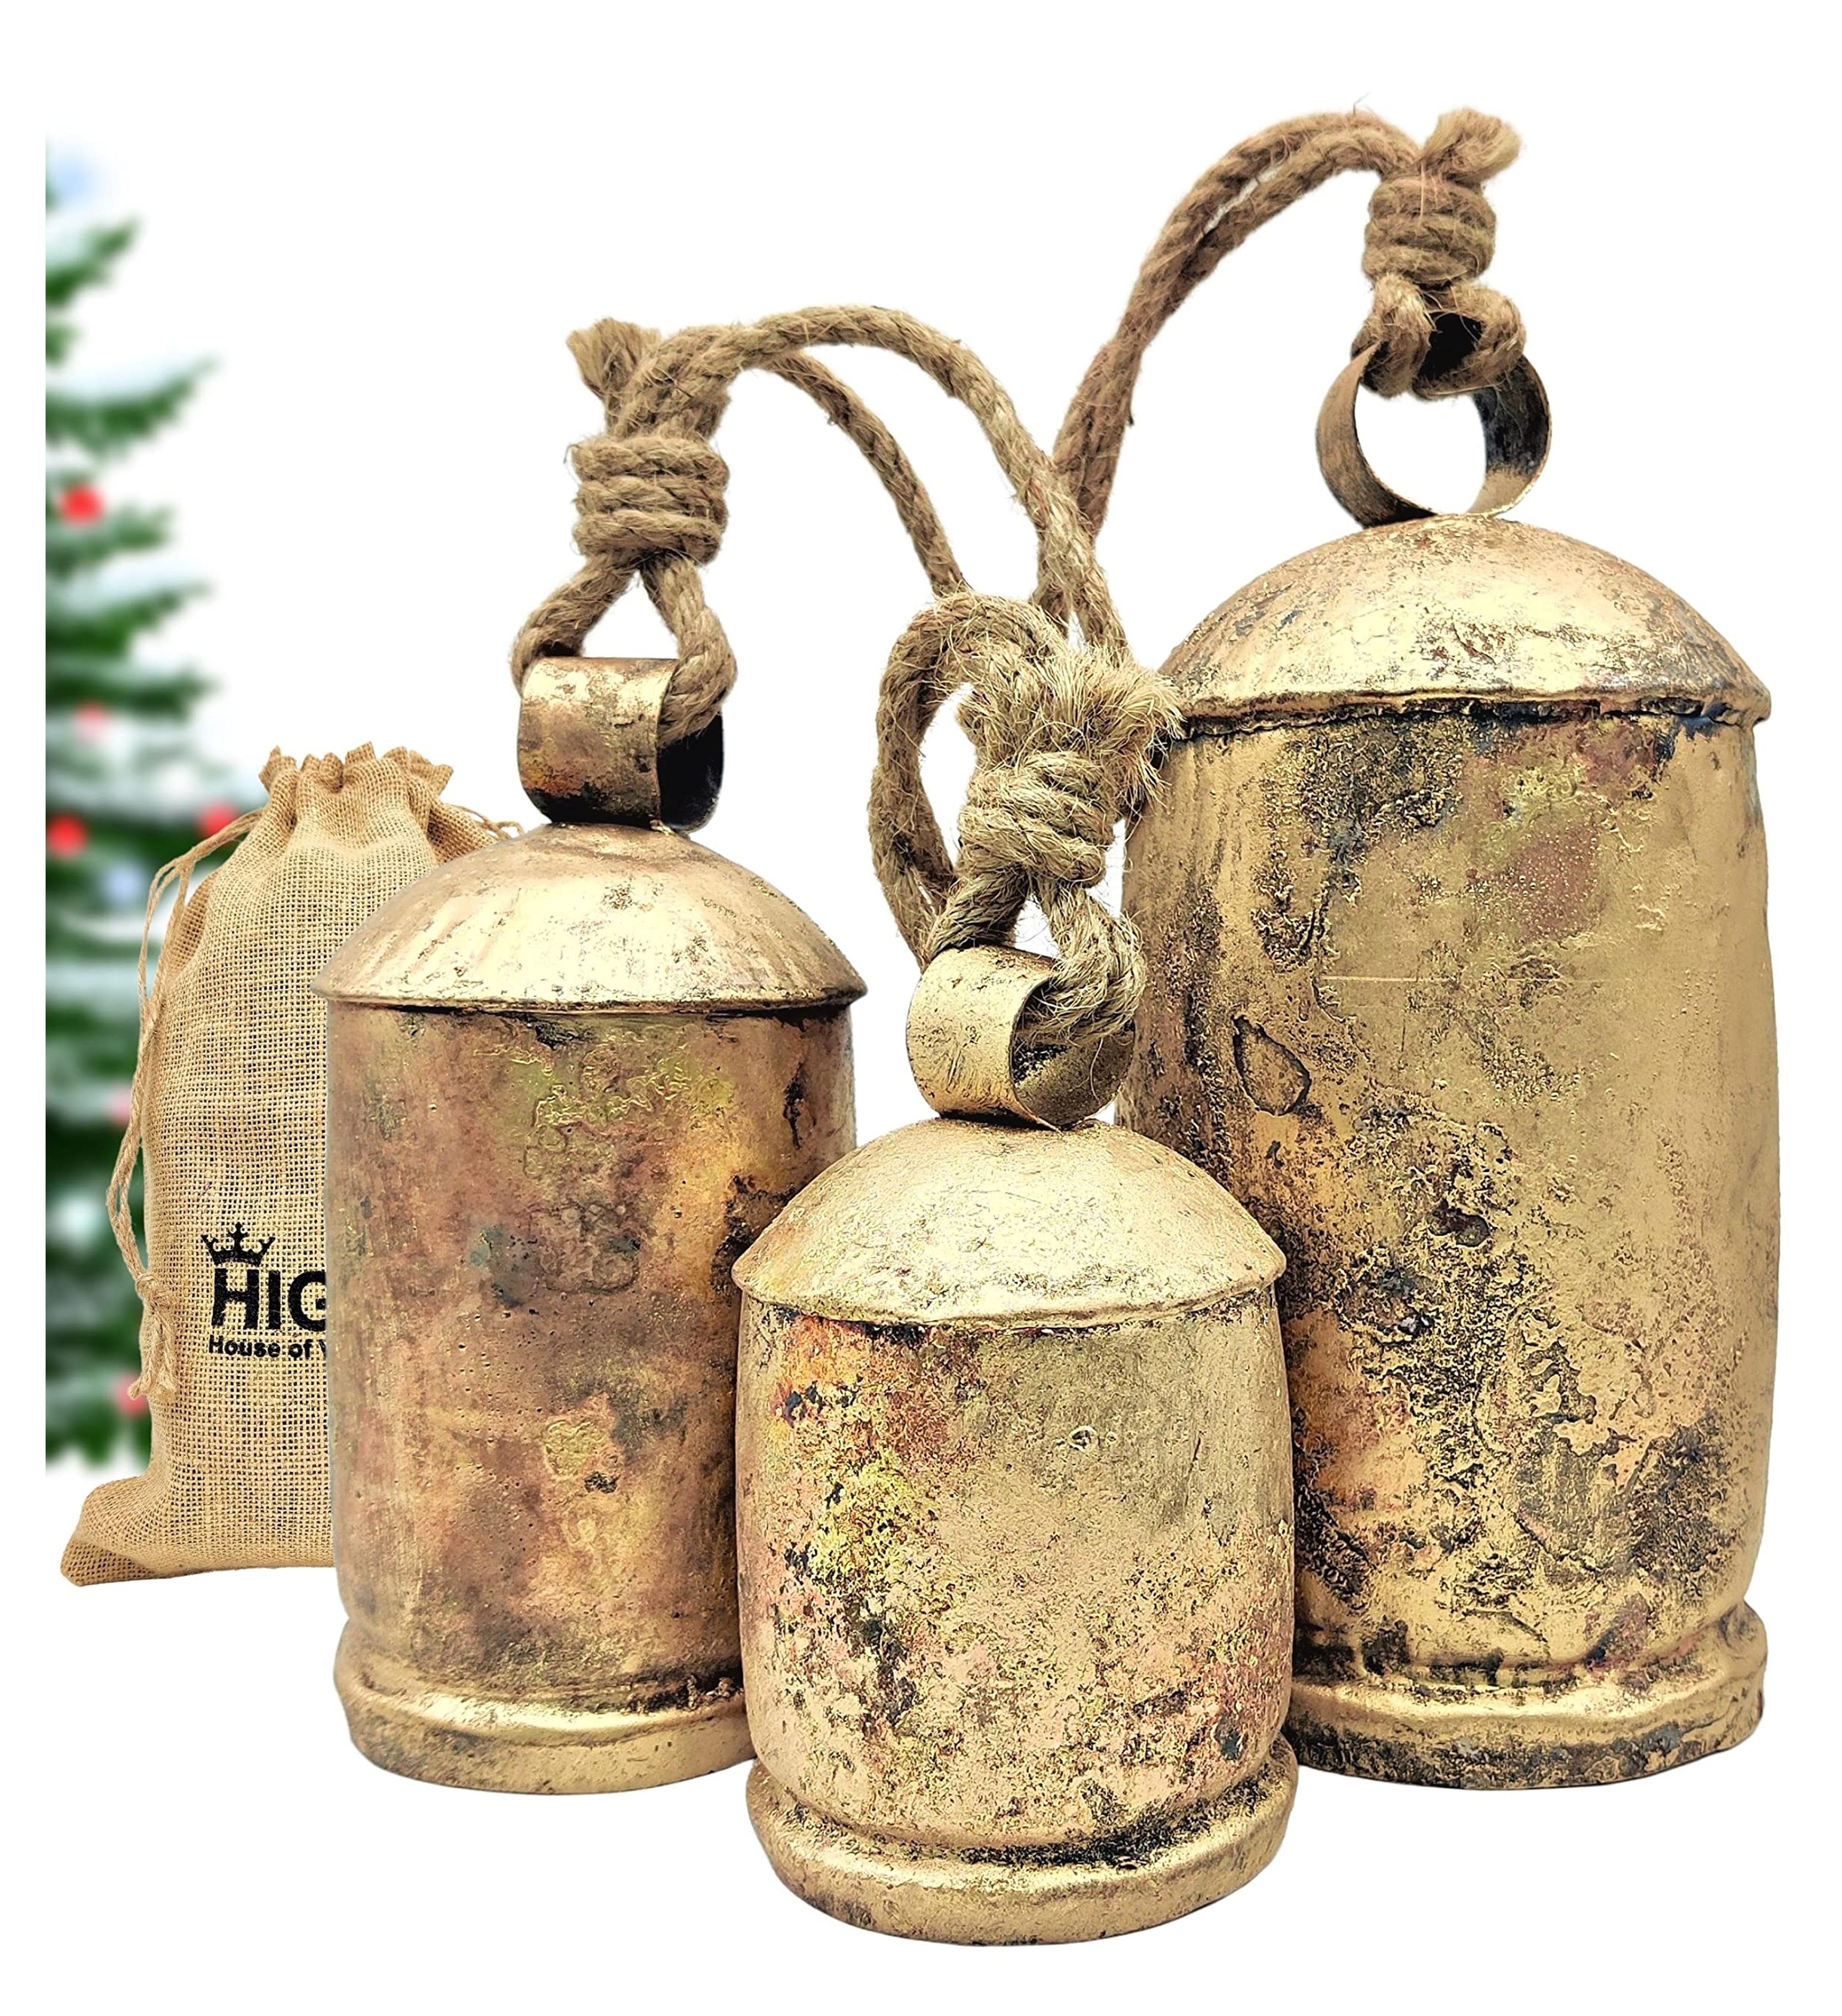 Amazon.com: HIGHBIX Set of 3 Giant Harmony Cow Bells Huge Vintage Handmade Rustic Lucky Christmas Hanging XL Bells On Rope (Country Rustic, X-Large) : Home & Kitchen